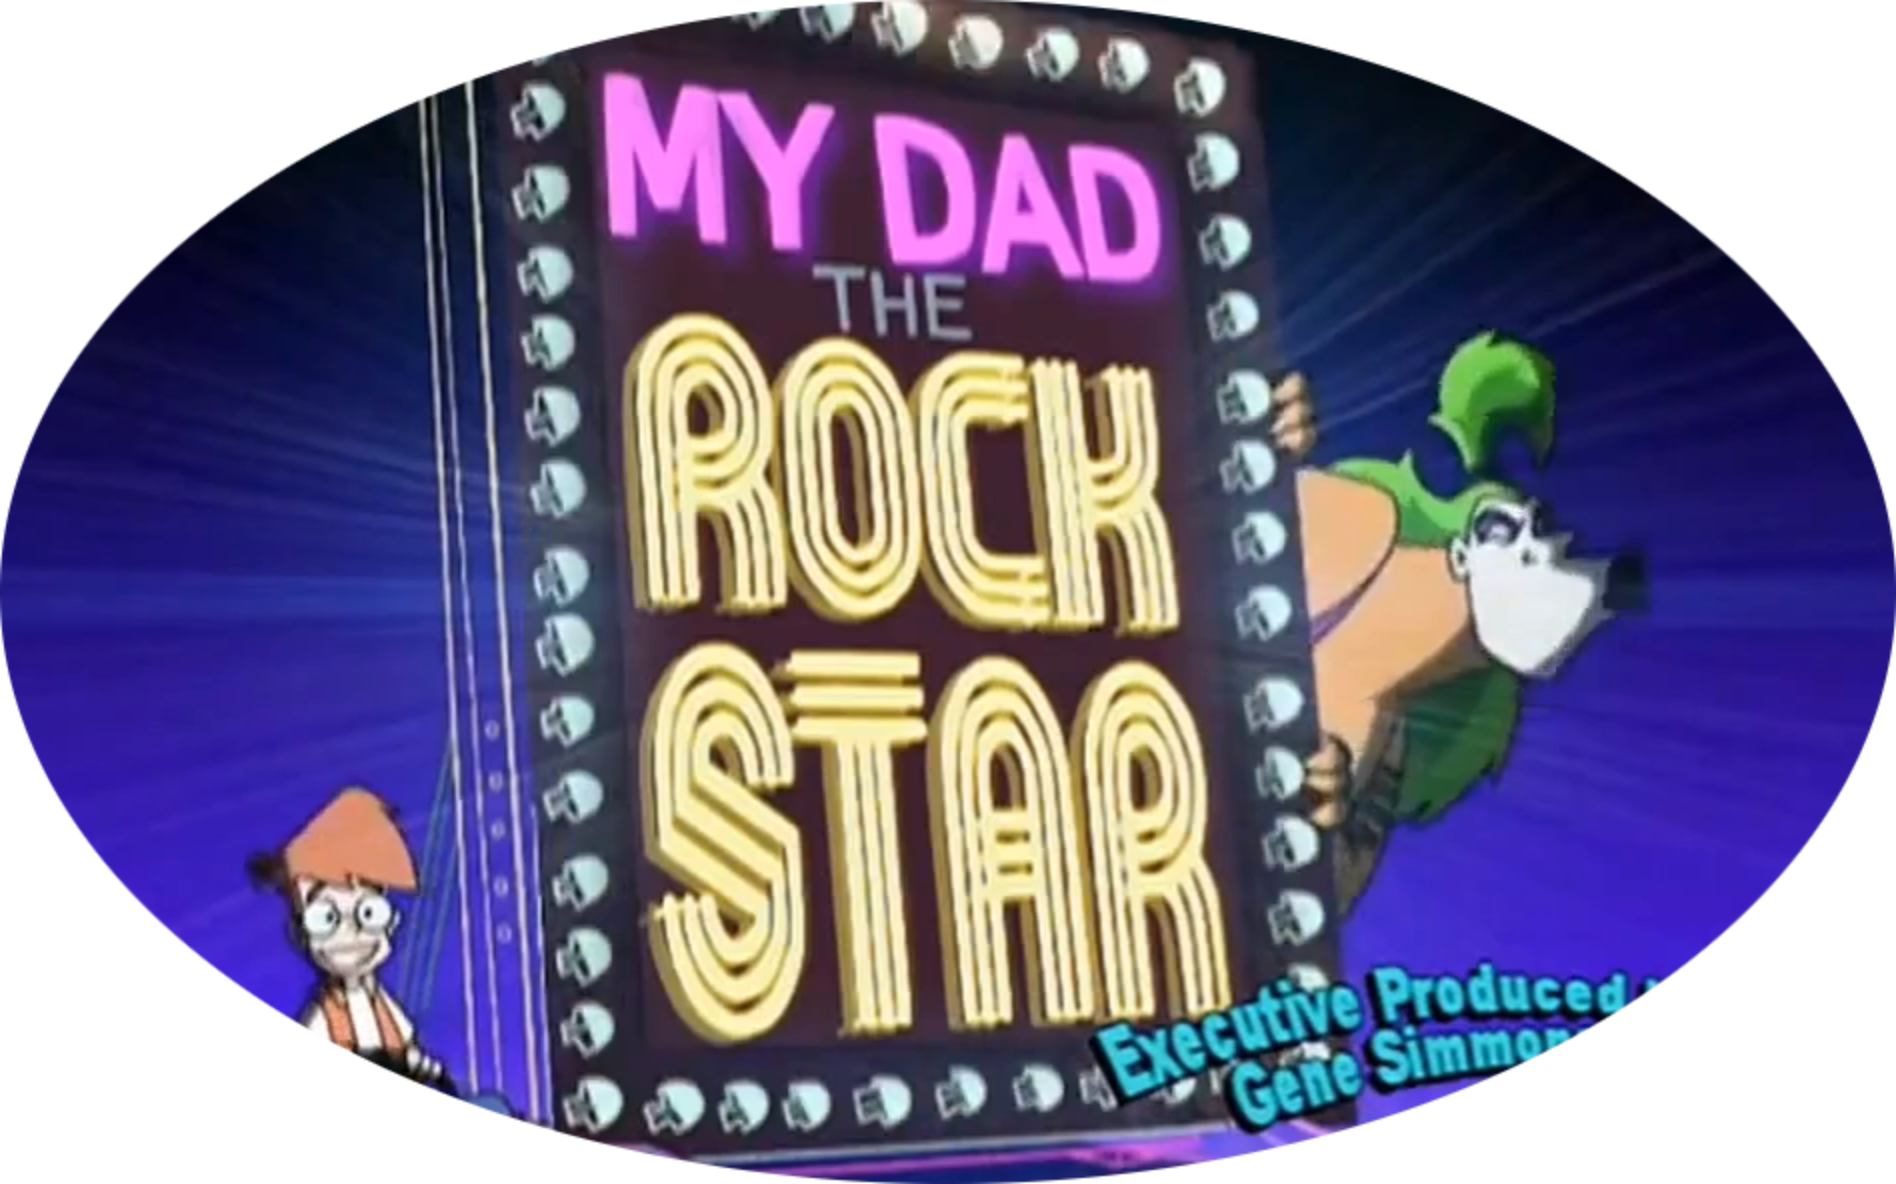 My Dad the Rock Star (3 DVDs Box Set)